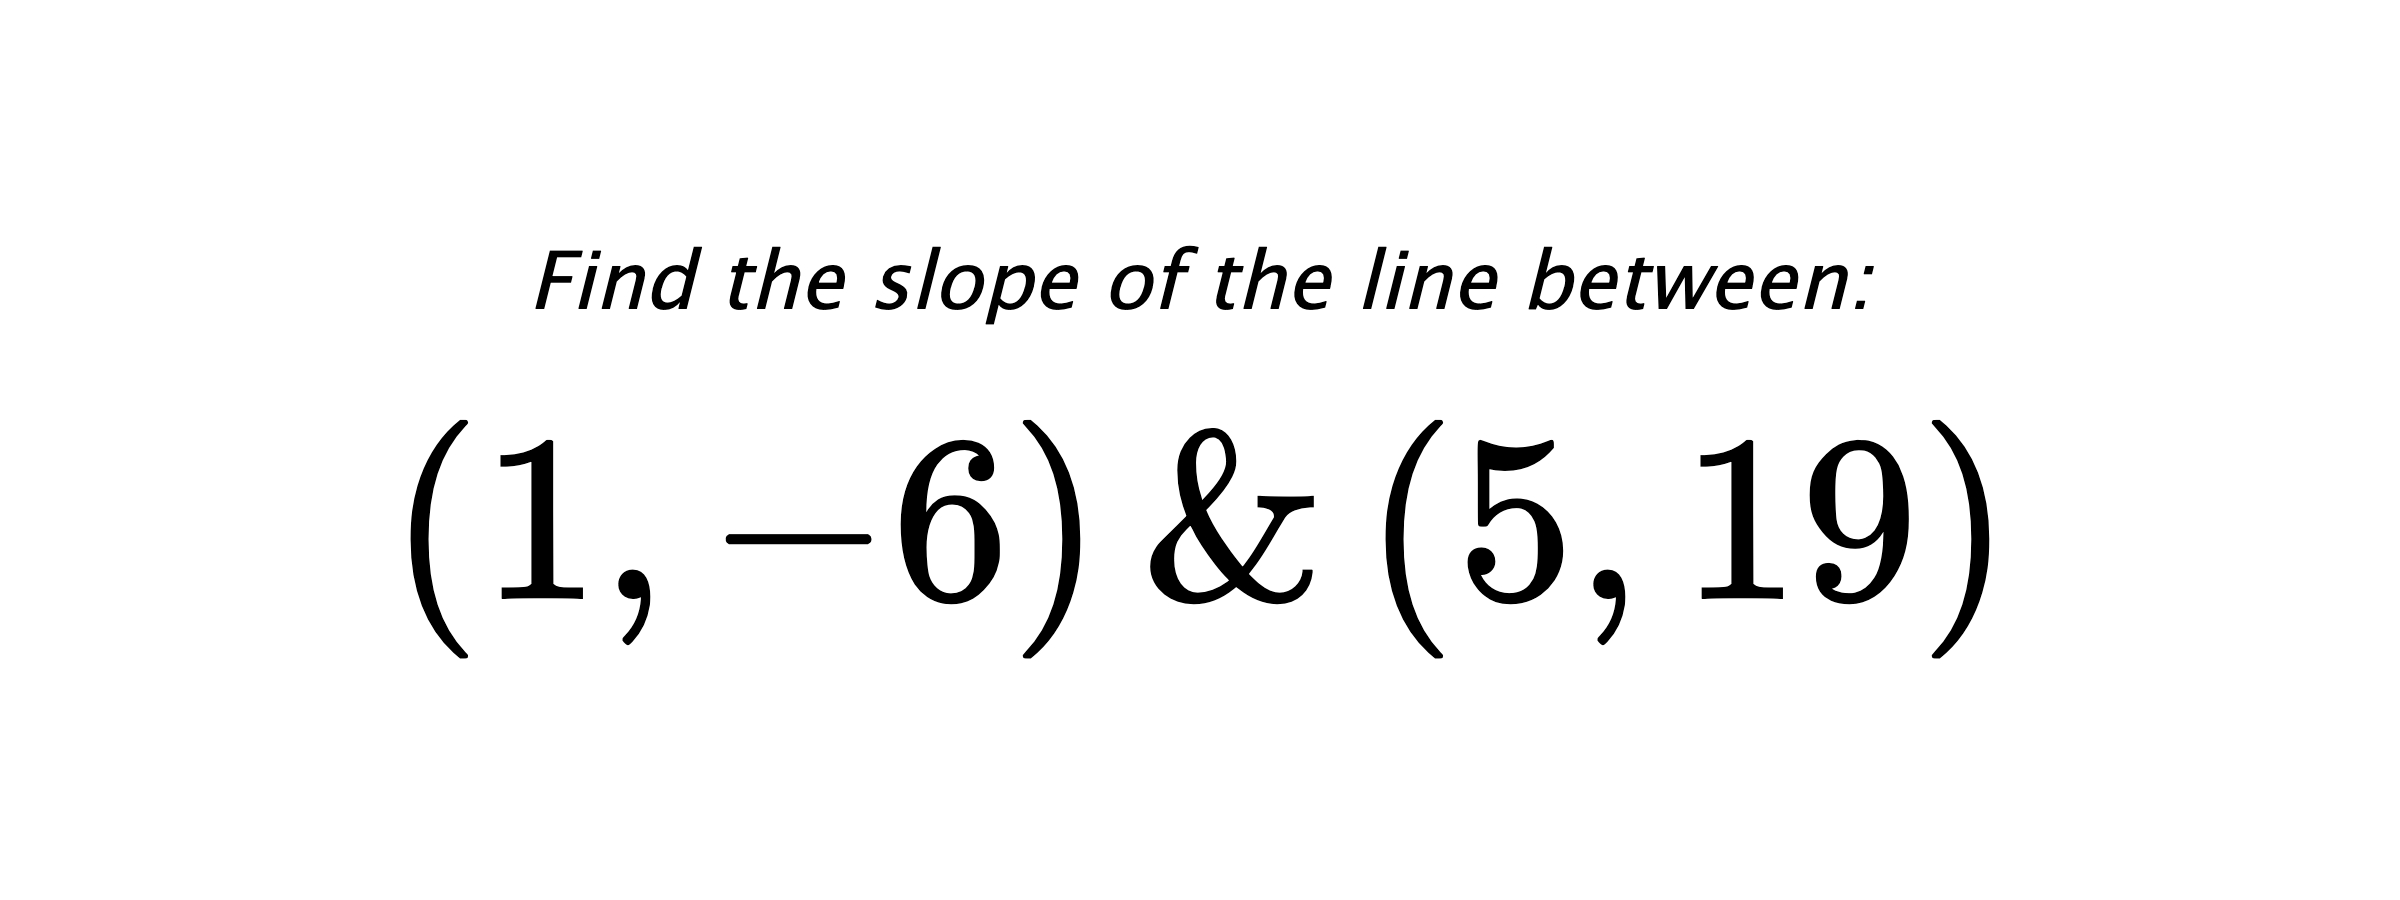 Find the slope of the line between: $ (1,-6) \hspace{0.5cm} \text{&} \hspace{0.5cm} (5,19) $